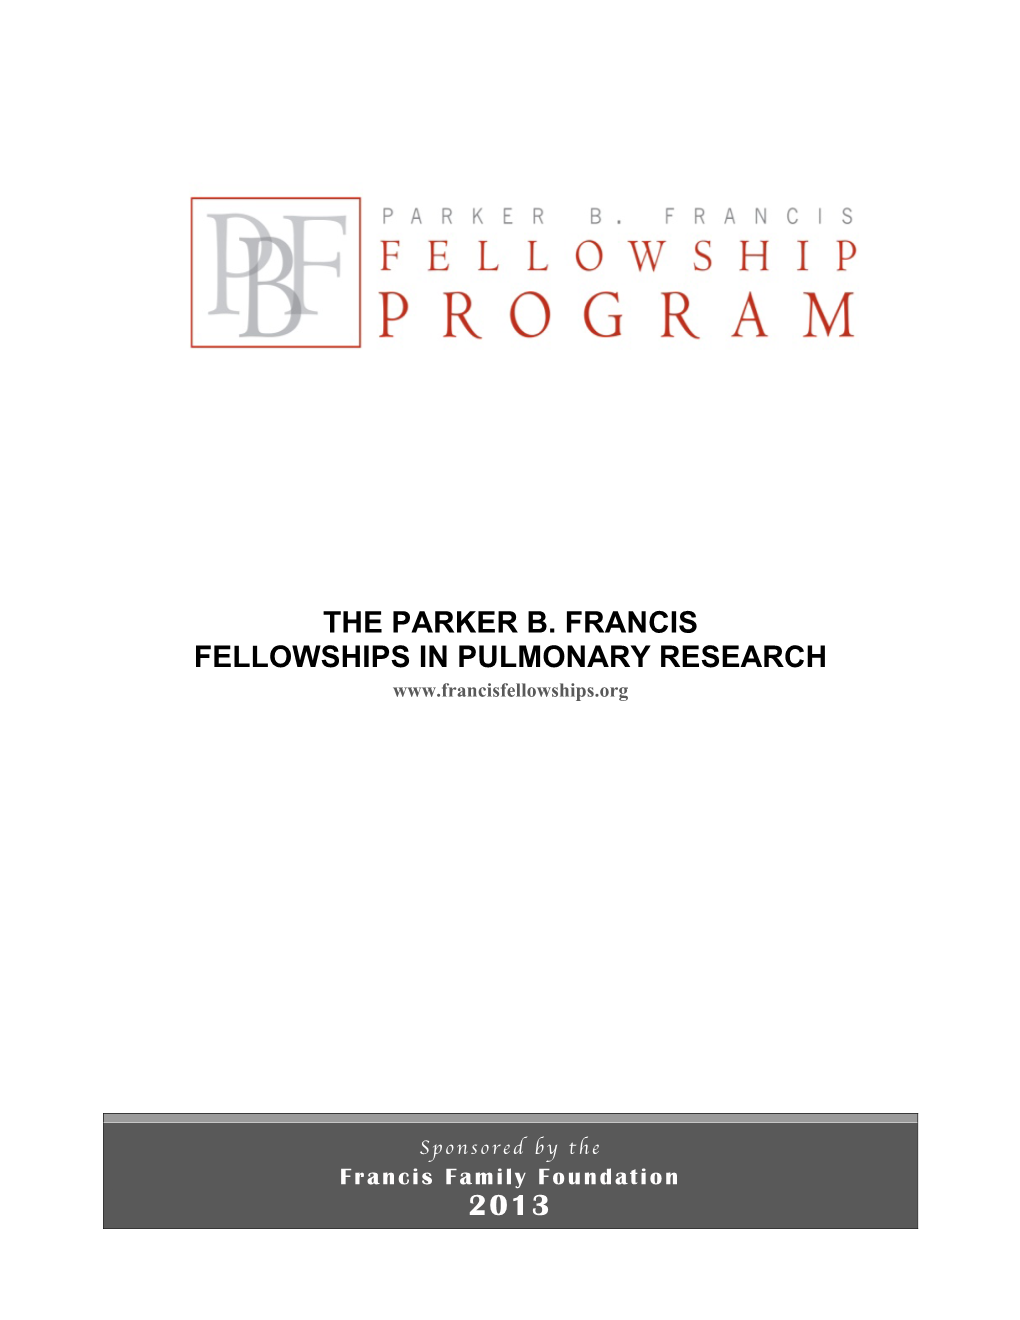 The Parker B. Francis Fellowships in Pulmonary Research